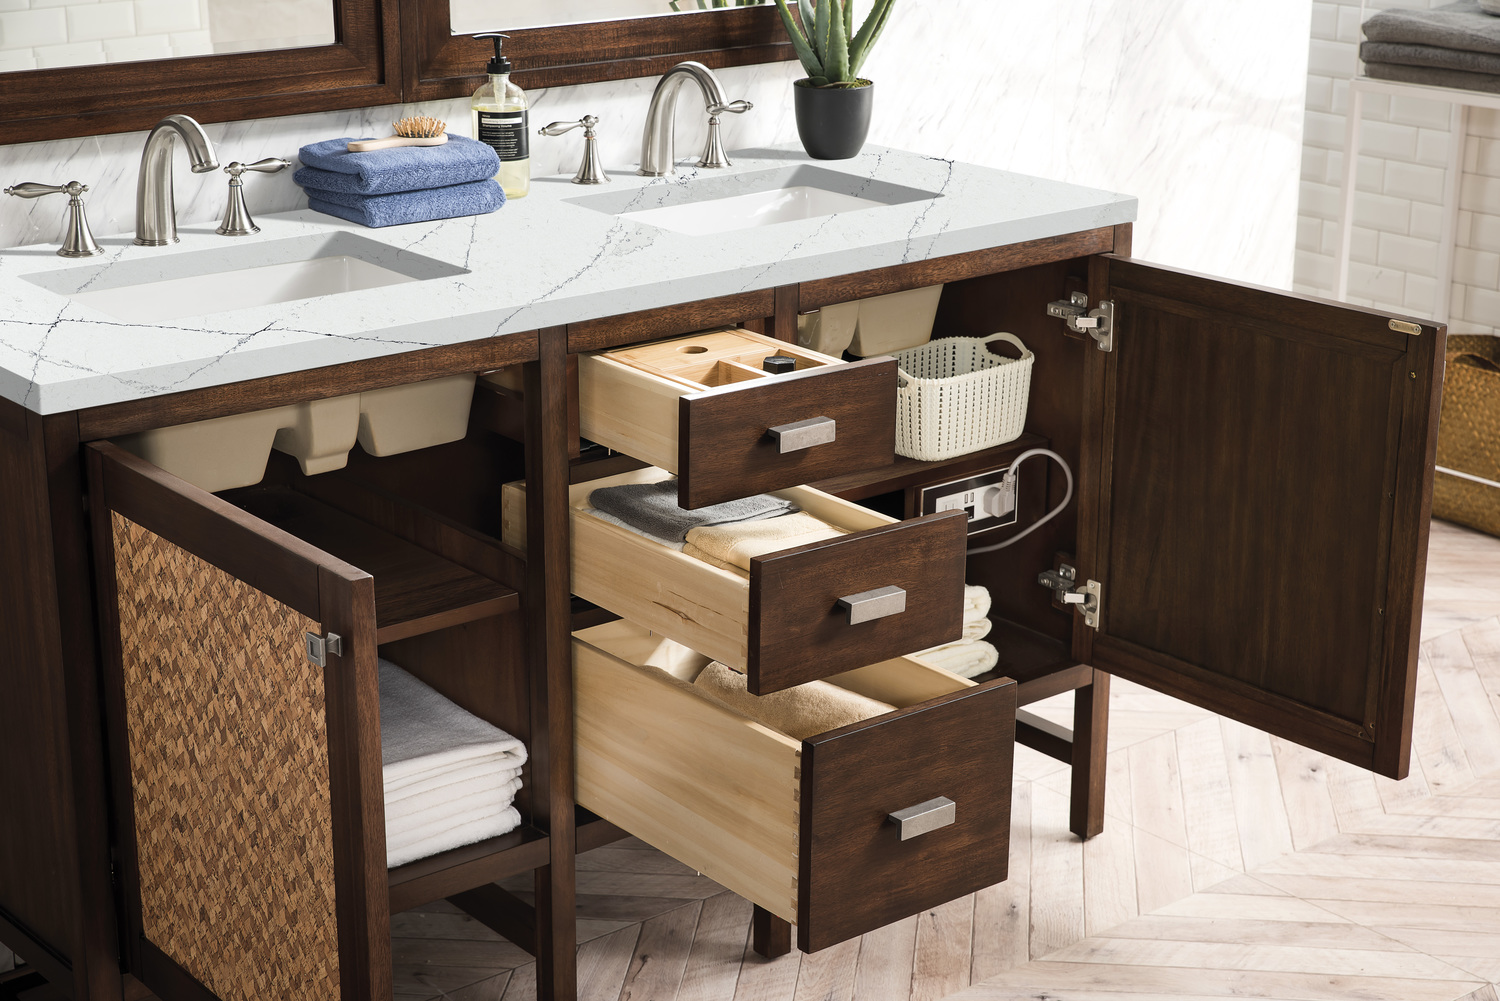 60 inch bathroom vanity with sink James Martin Vanity Mid-Century Acacia Traditional, Transitional